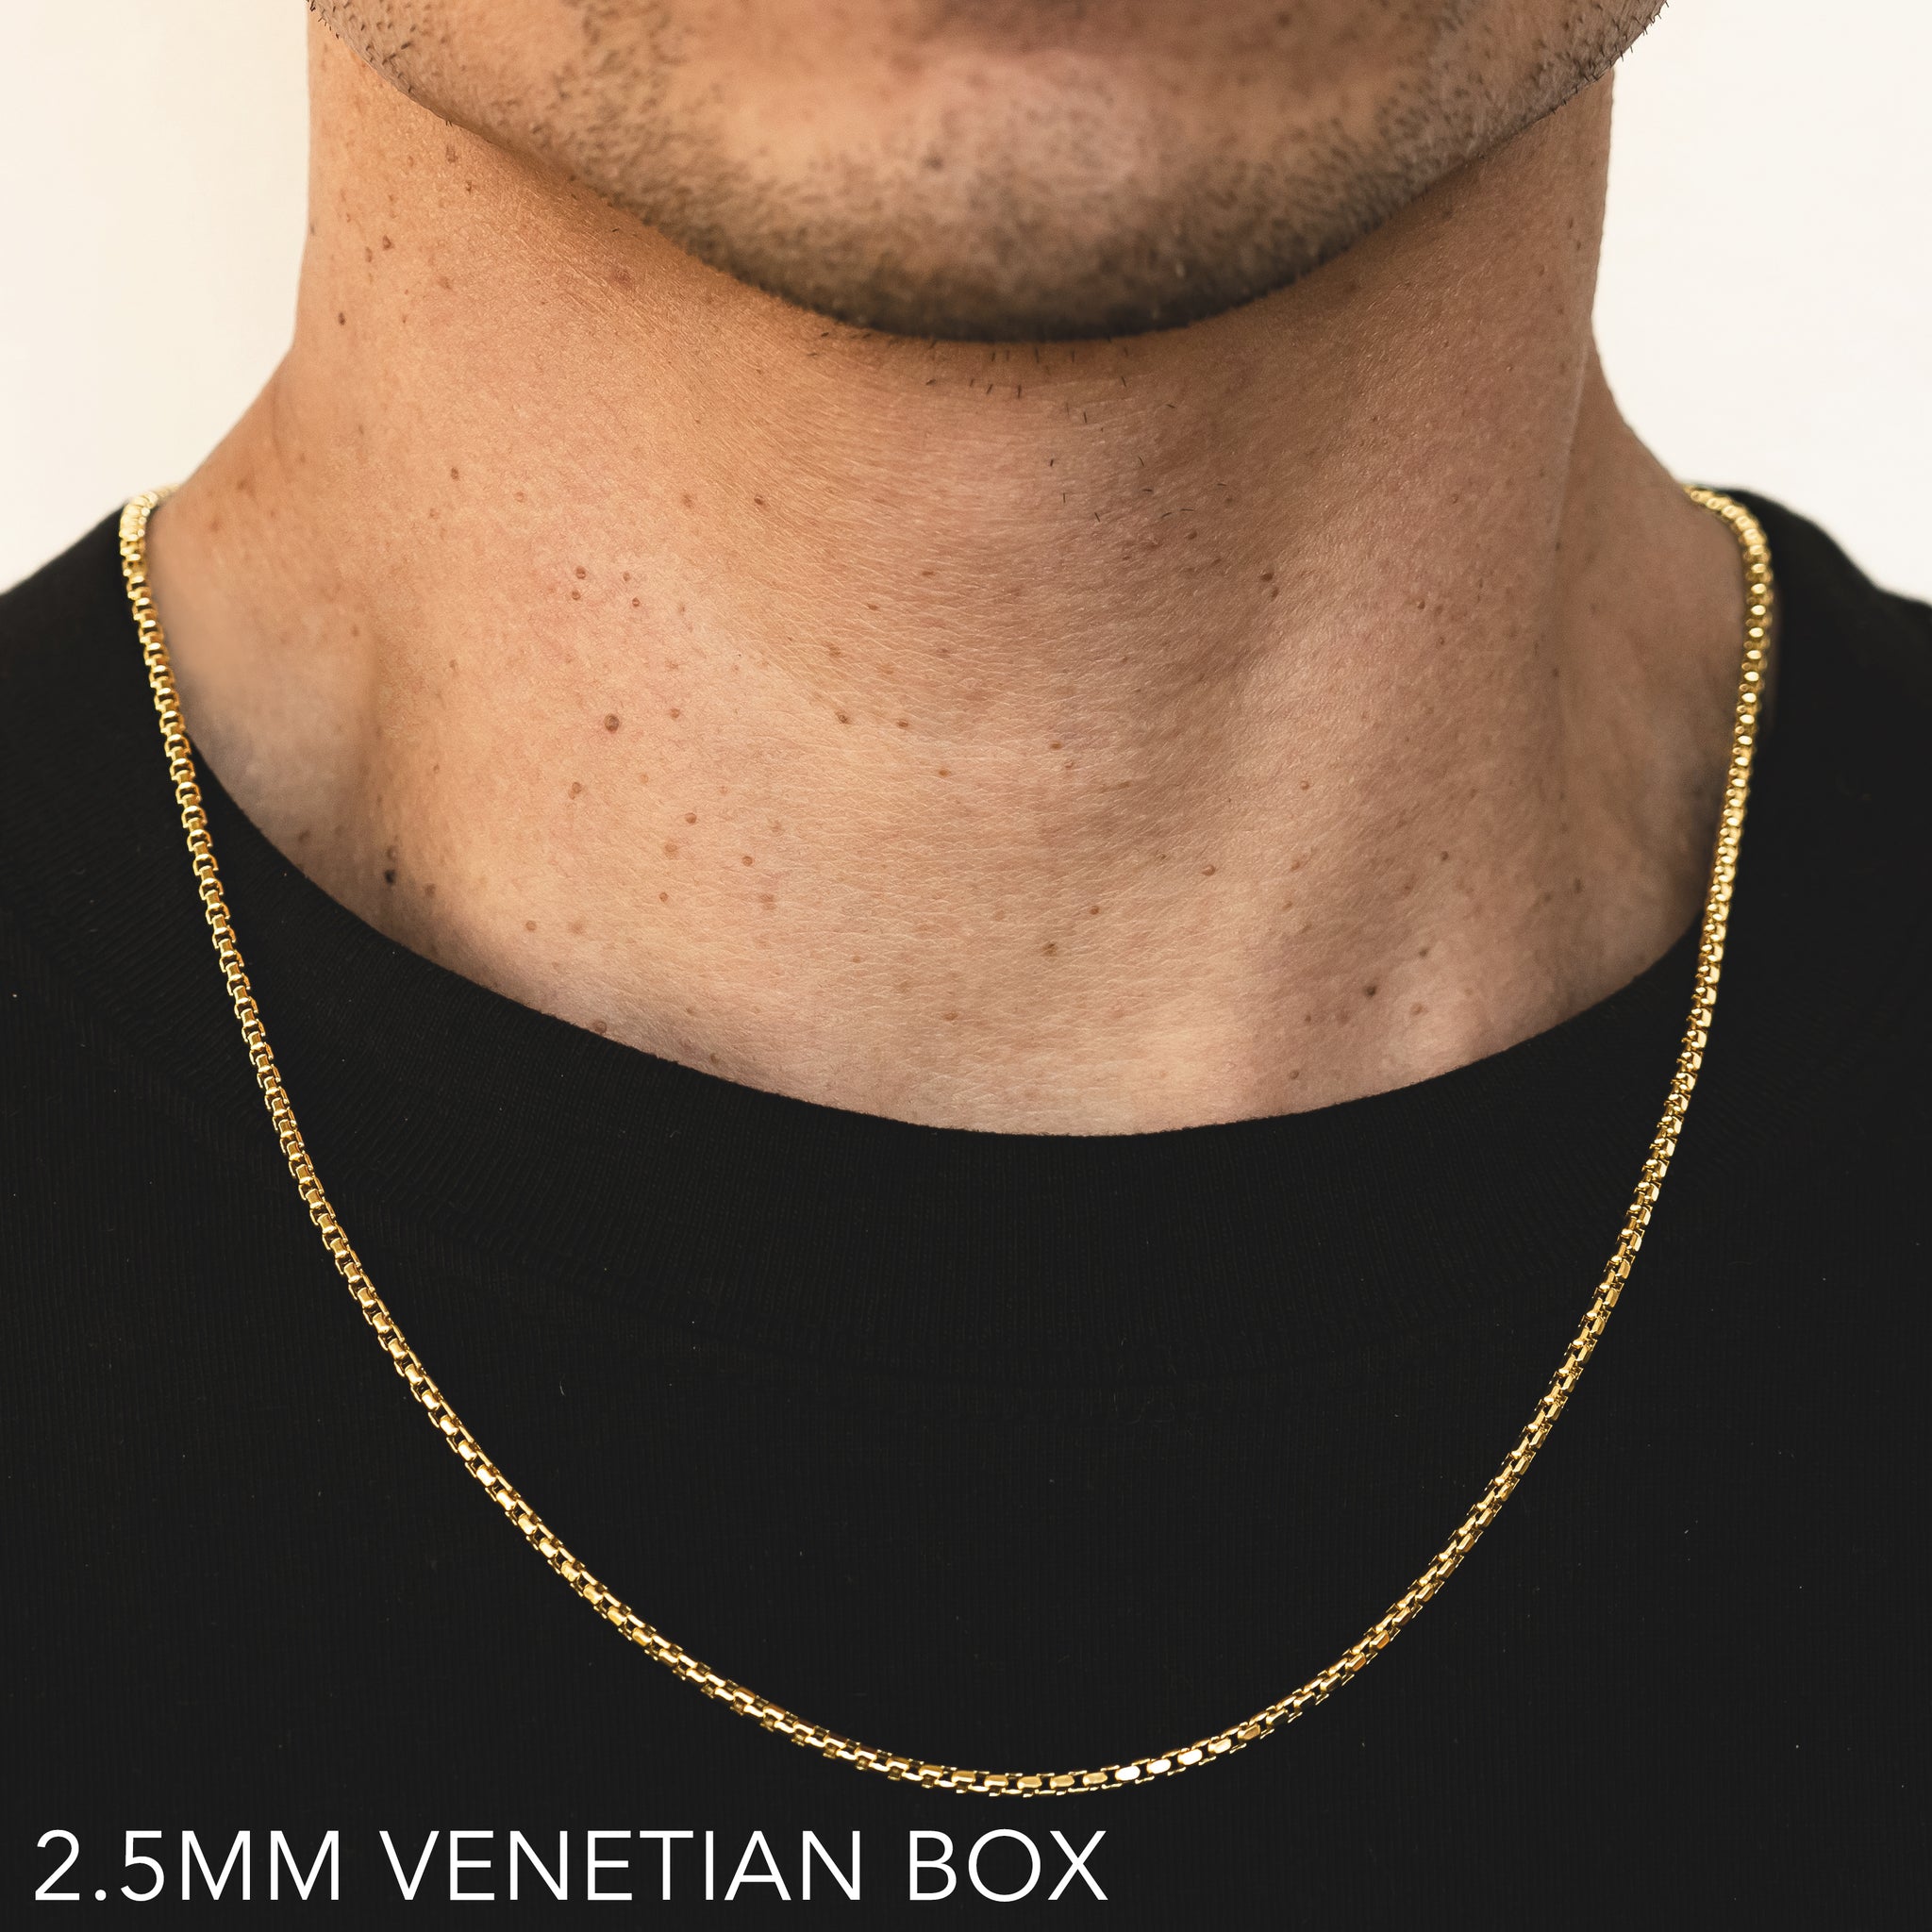 18K 2.5MM YELLOW GOLD SOLID VENETIAN BOX 18" CHAIN NECKLACE (AVAILABLE IN LENGTHS 7" - 30")